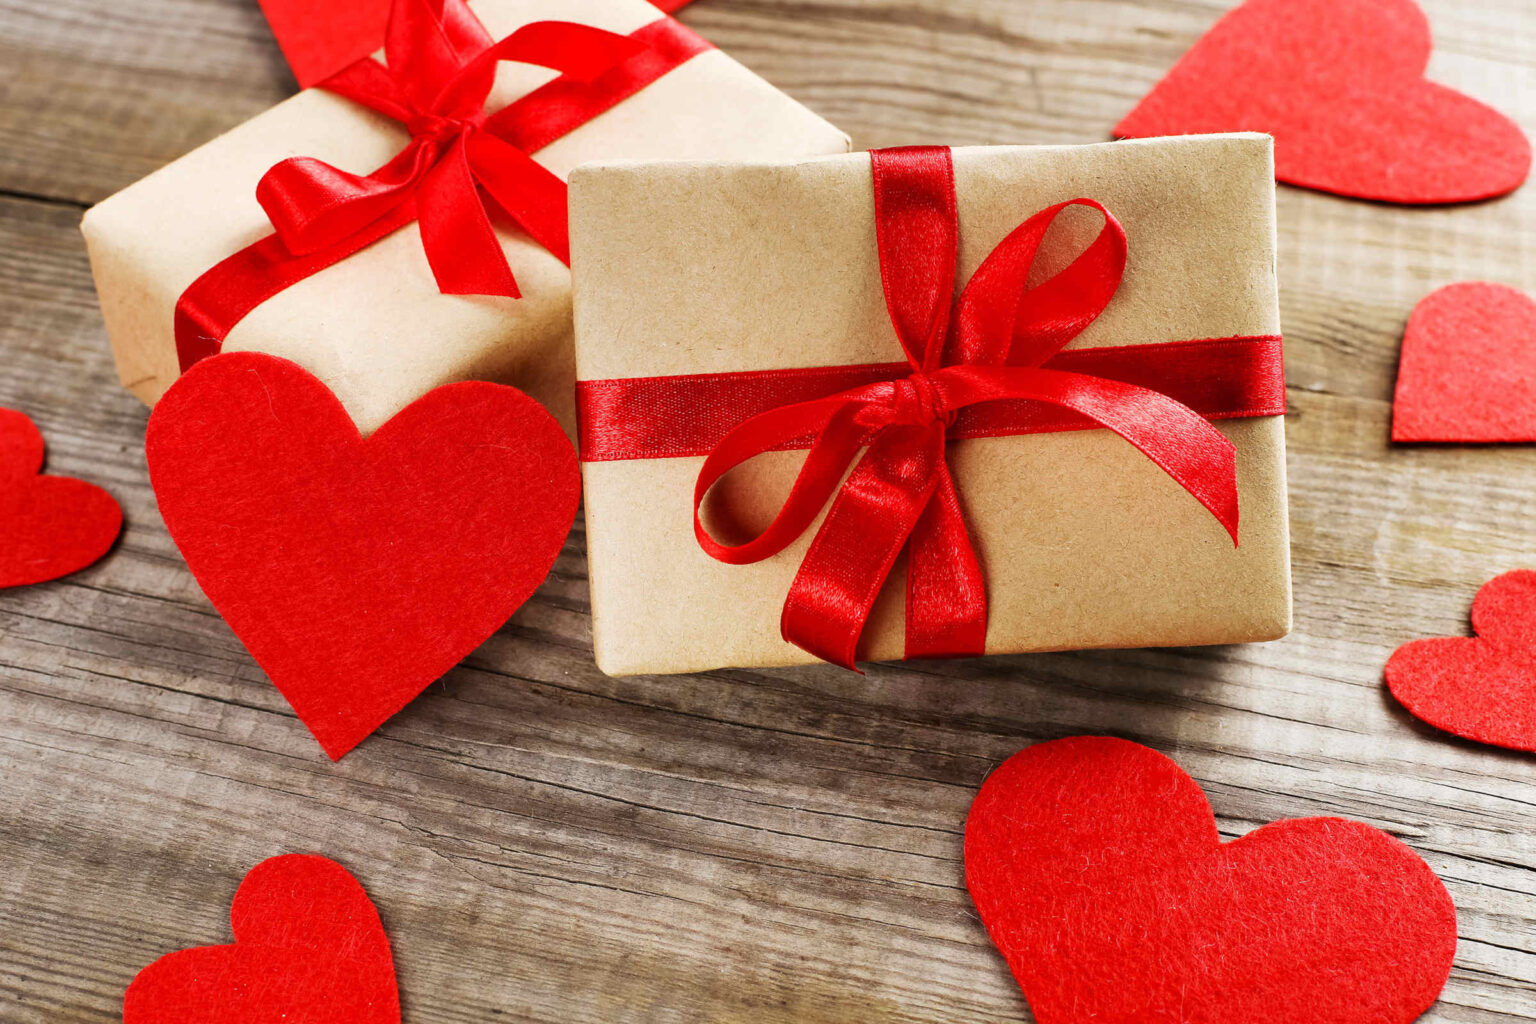 Valentine's Day is coming up fast. Are you still looking for a gift? Don't worry! From the office to the bedroom, FlexiSpot has a gift guide for you.